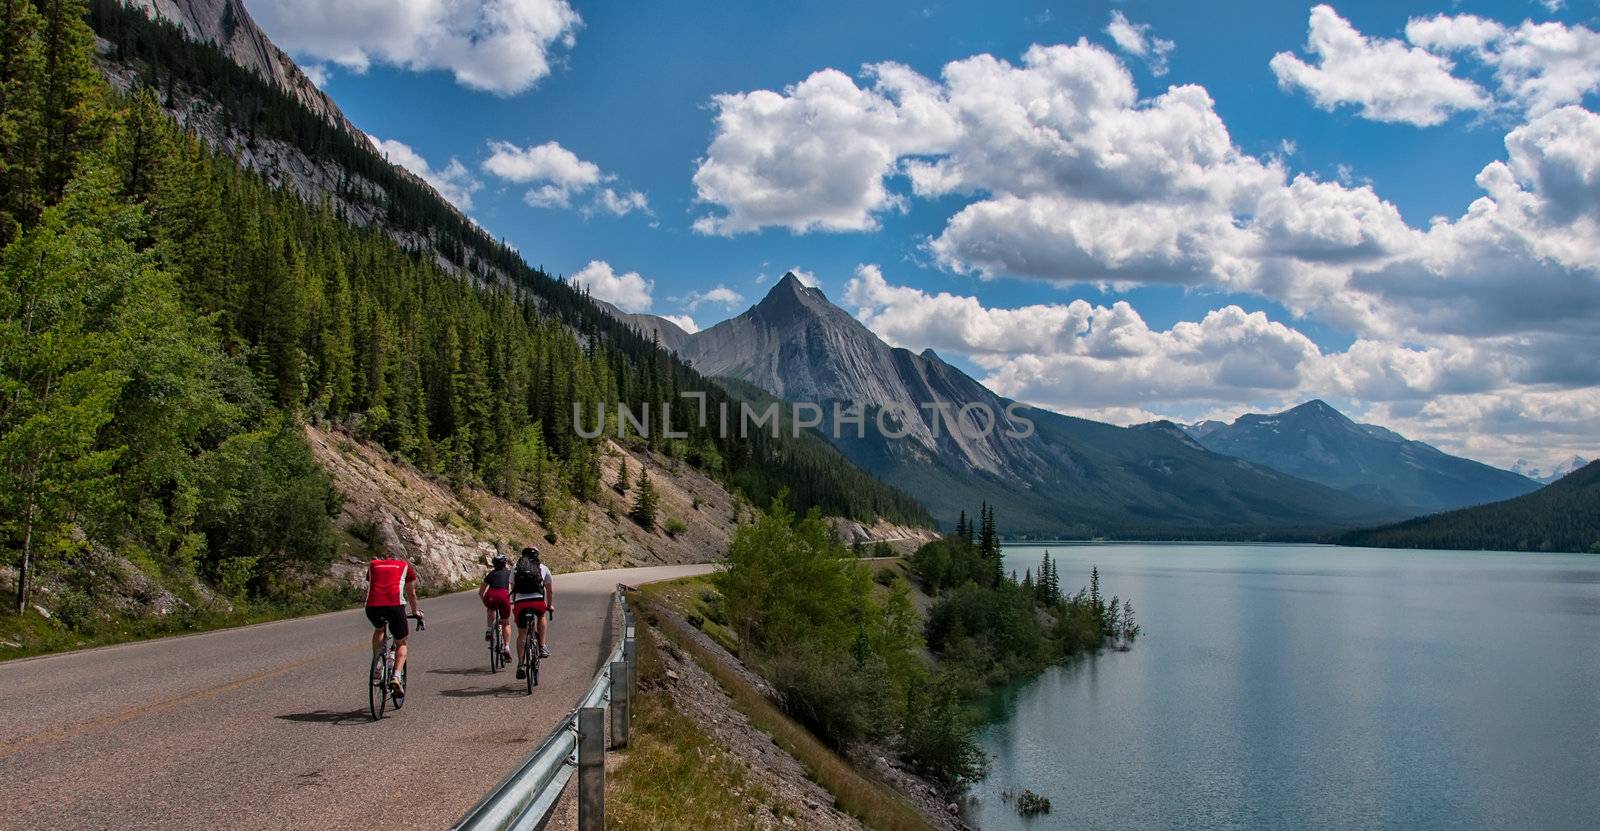 Three Cyclists On Road With Mountains by JamesWheeler